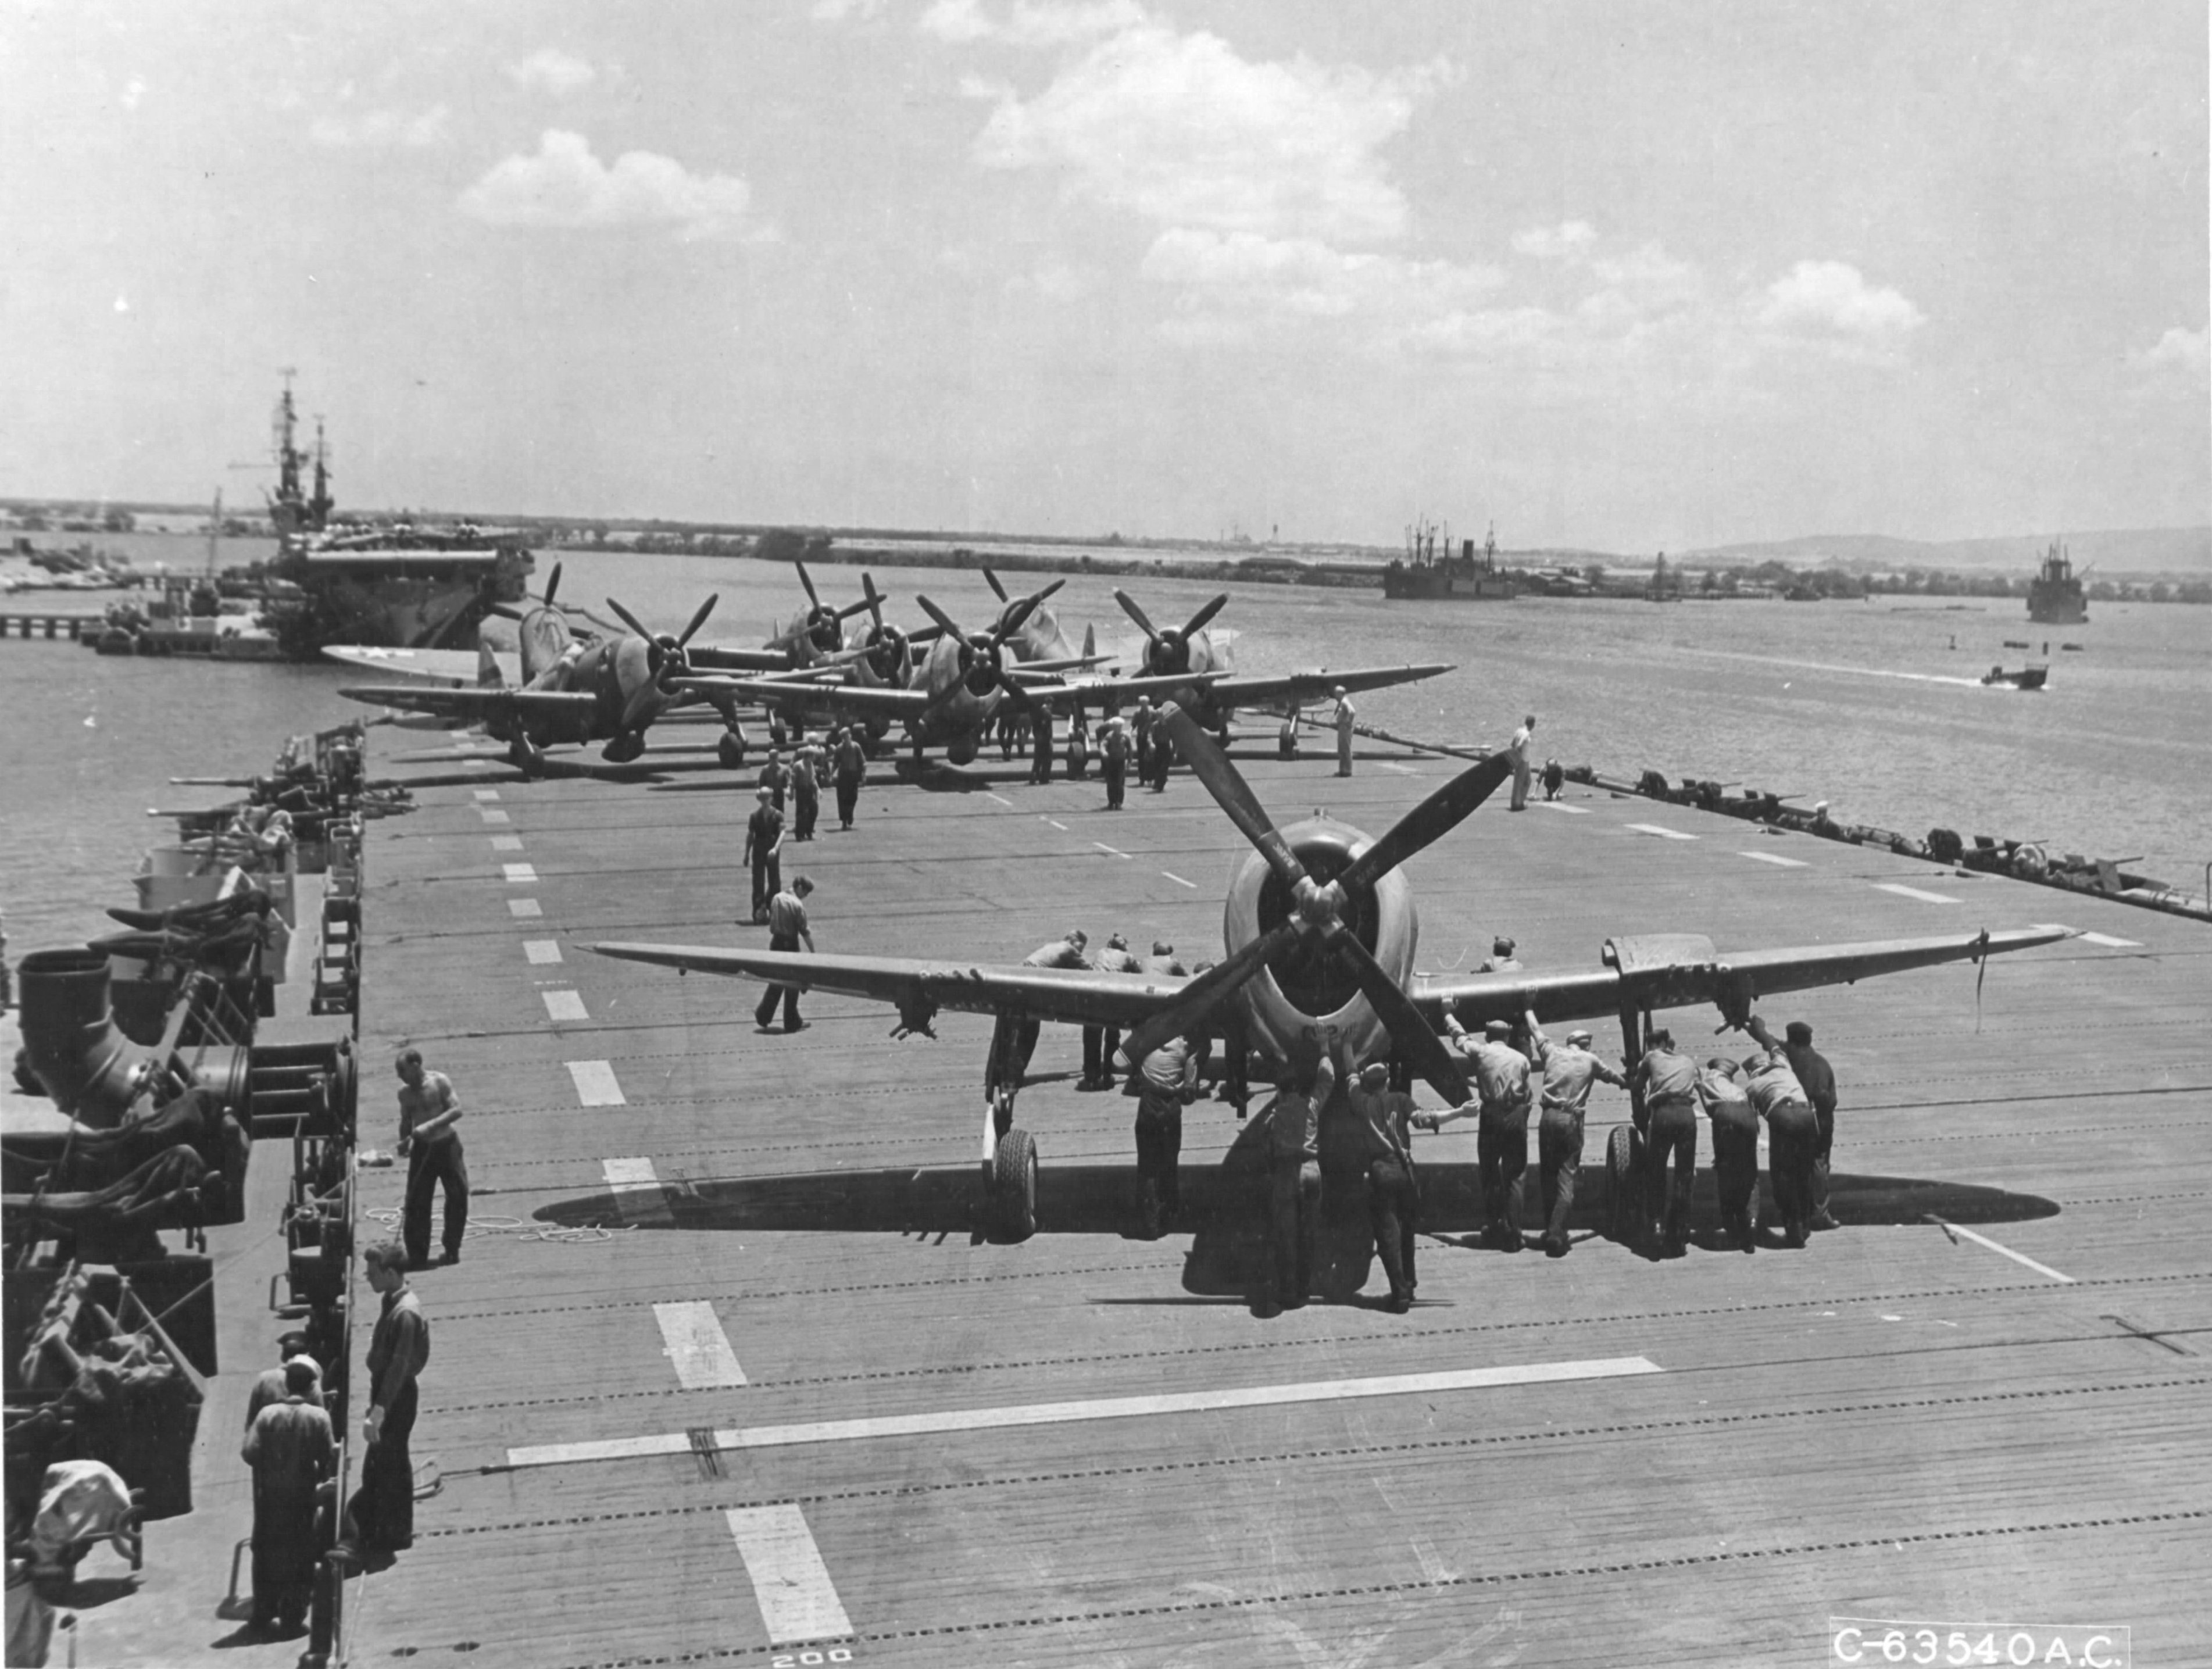 P-47D Thunderbolts of the 318th Fighter Group are loaded onto Escort Carrier USS Natoma Bay, Pearl Harbor, Hawaii, June 1, 1944. The Fighter Group was on its way to Saipan, Marianas. Note USS Manila Bay with the rest of the Fighter Group’s Thunderbolts.